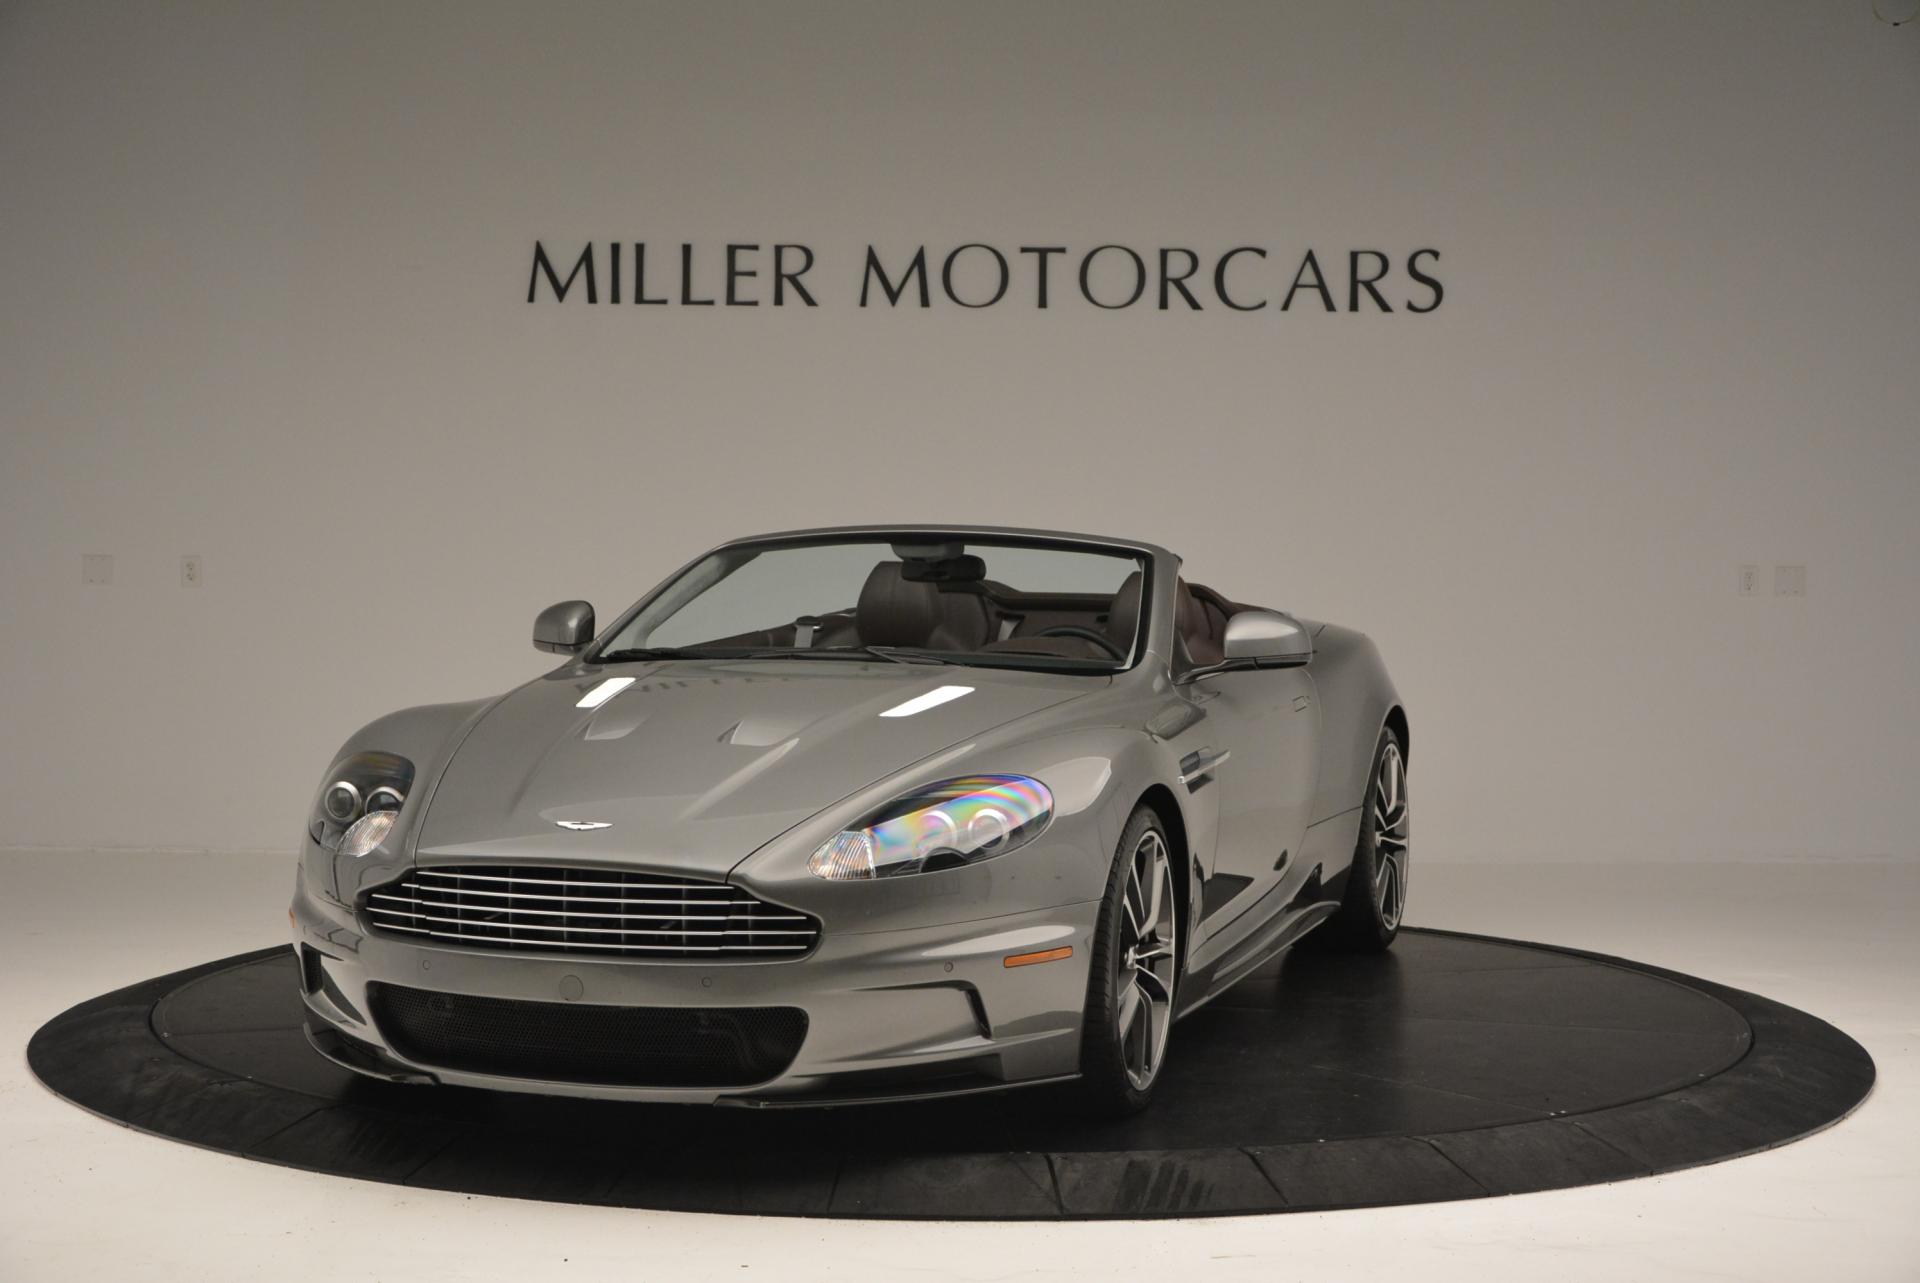 Used 2010 Aston Martin DBS Volante for sale Sold at McLaren Greenwich in Greenwich CT 06830 1